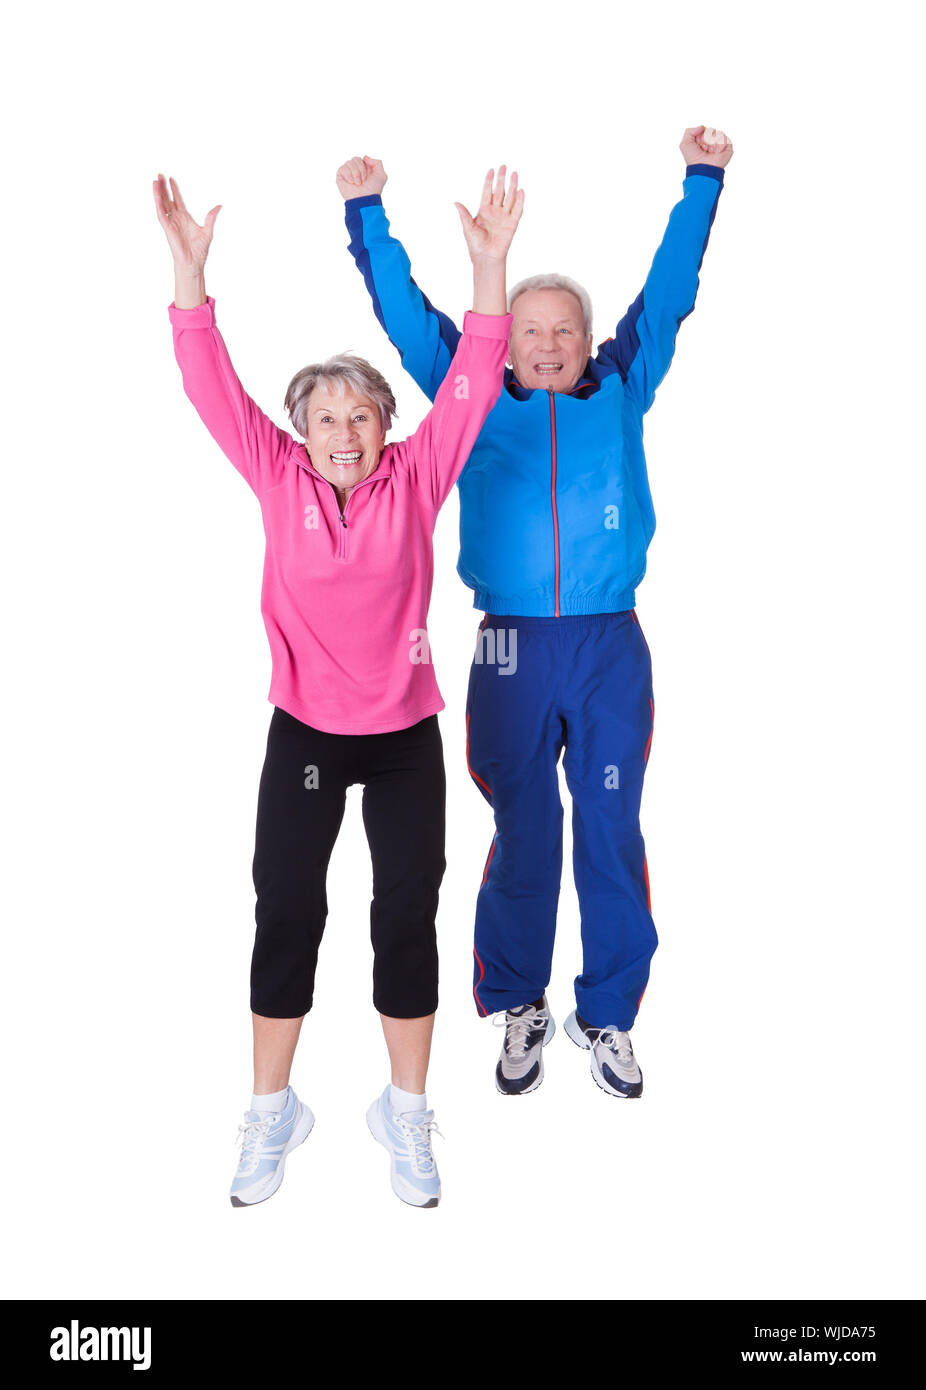 Older person gym Cut Out Stock Images & Pictures - Page 2 - Alamy